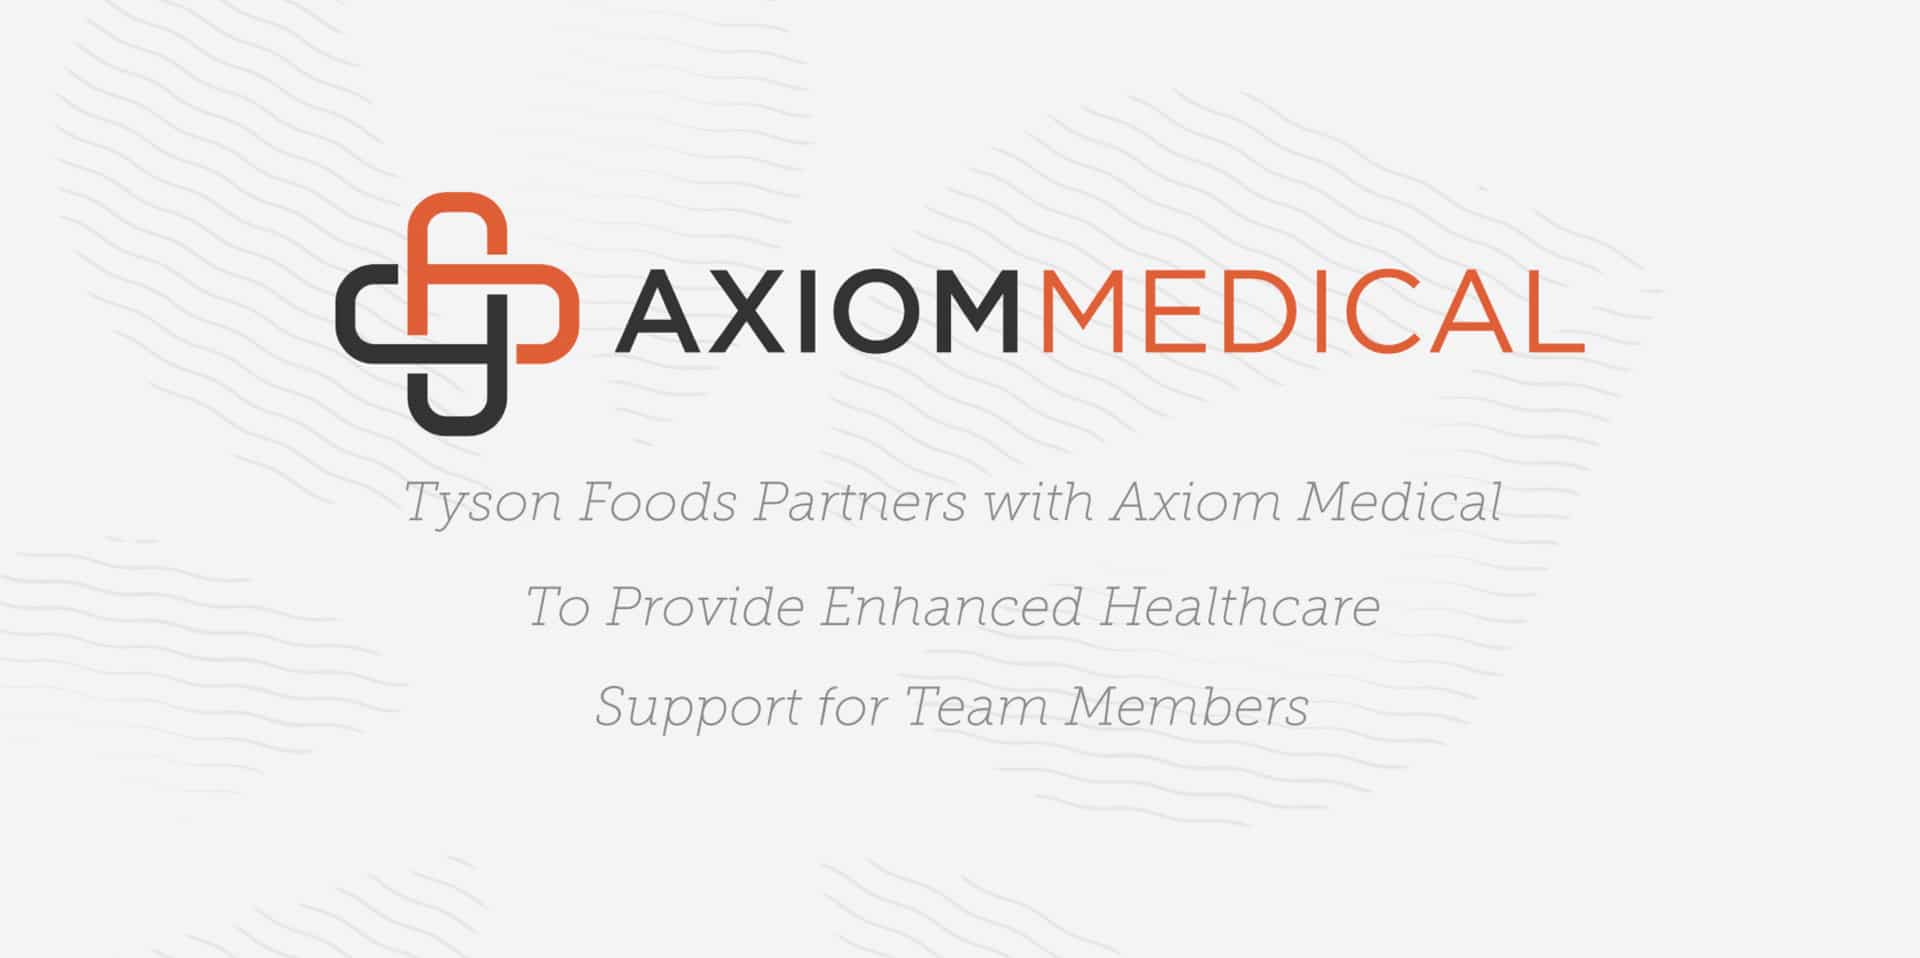 Tyson Foods Partners with Axiom Medical to Provide Enhanced Healthcare Support for Team Members